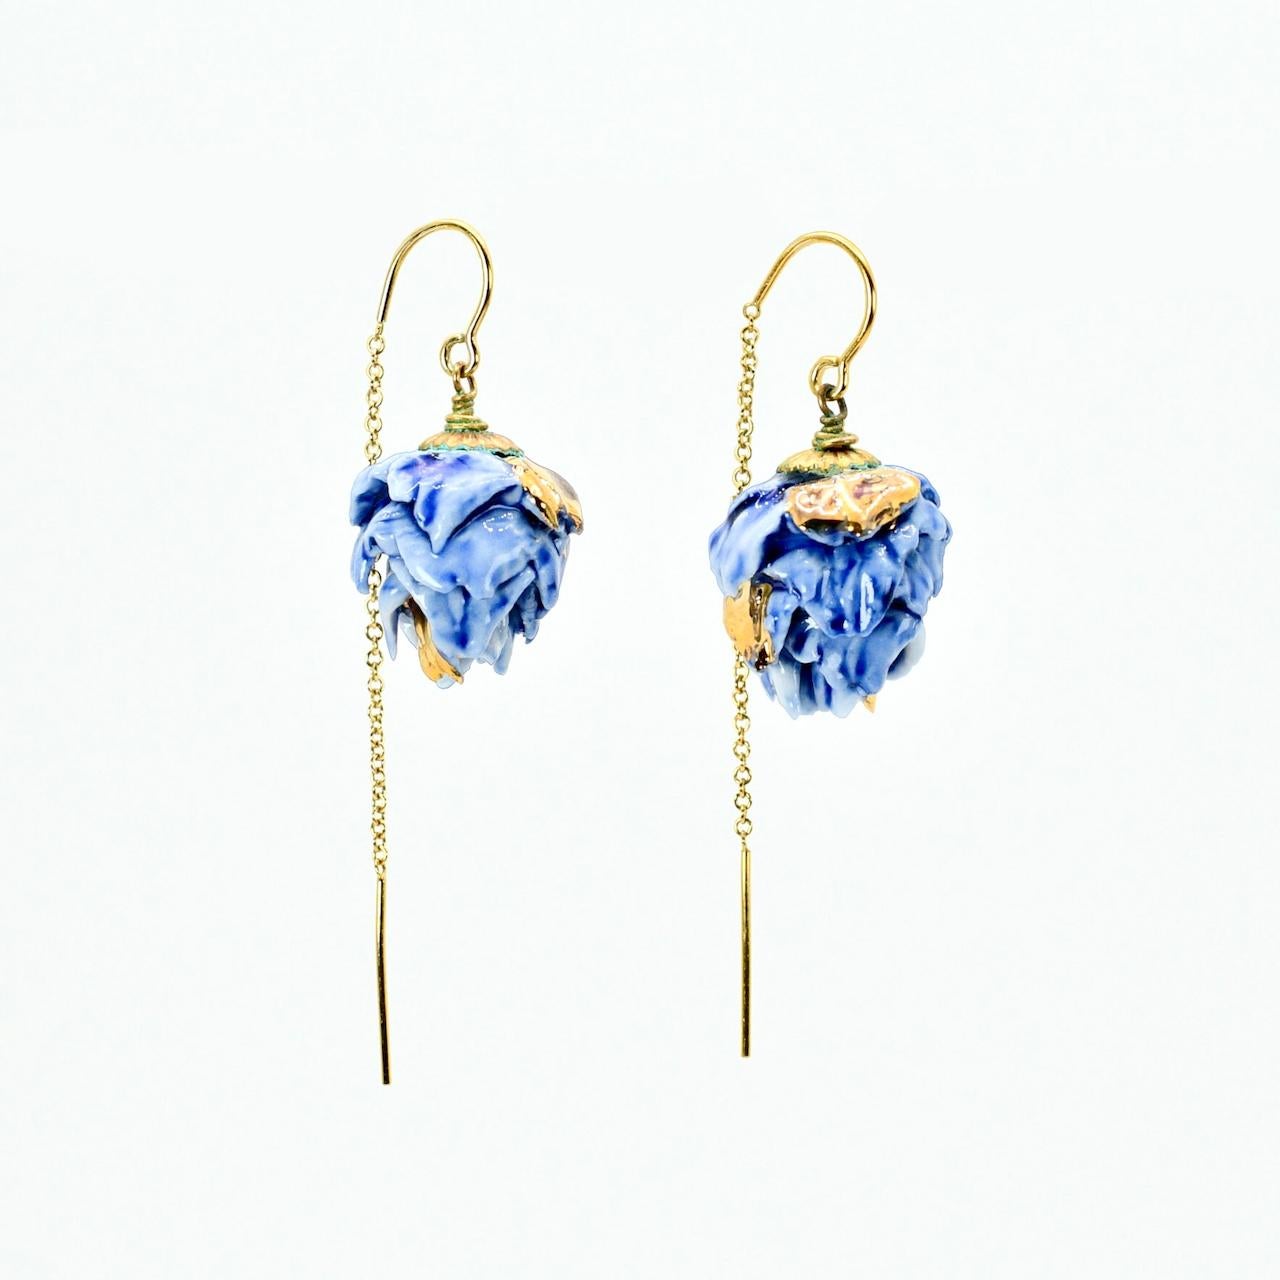 Porcelain  24K gold  Handmade in London

These Cobalt Blue Porcelain Artichokes Earrings are intricately handcrafted with white and blue porcelain and enhanced with hints of blue patina, creating a classy and a bit vintage combination. The